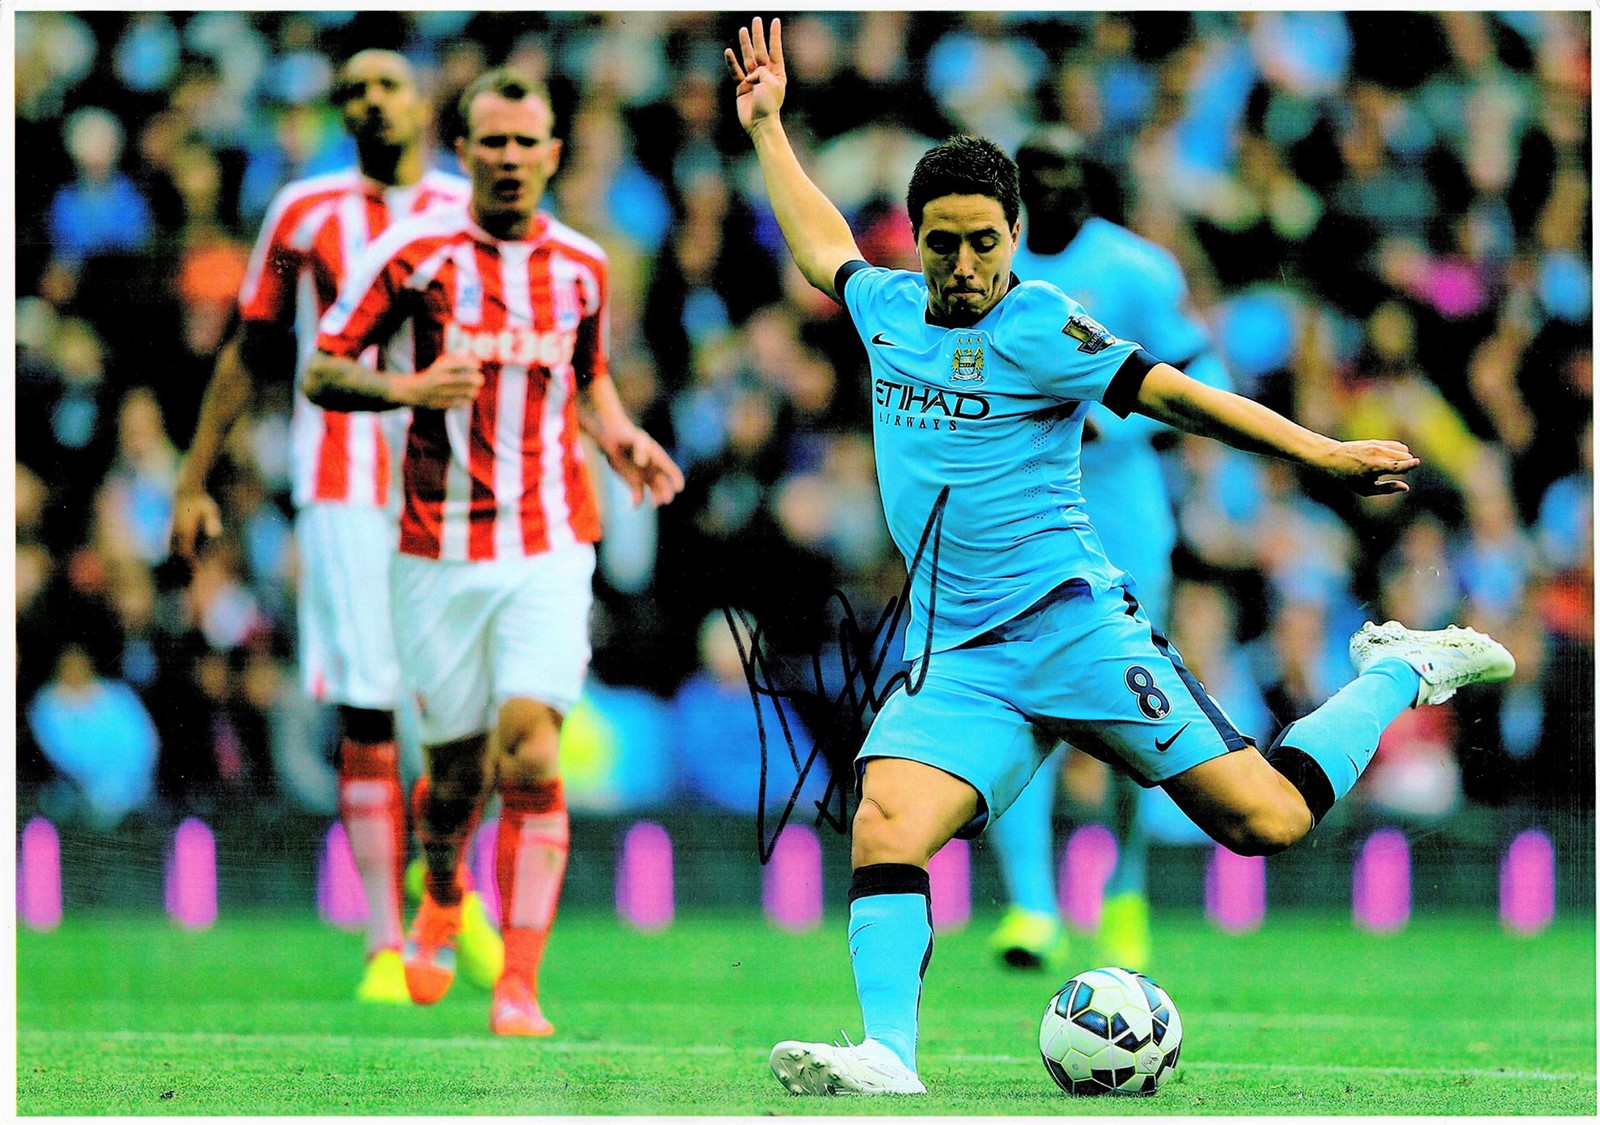 Football Samir Nasri signed 16x12 colour photo pictured while in action for Manchester City. Good